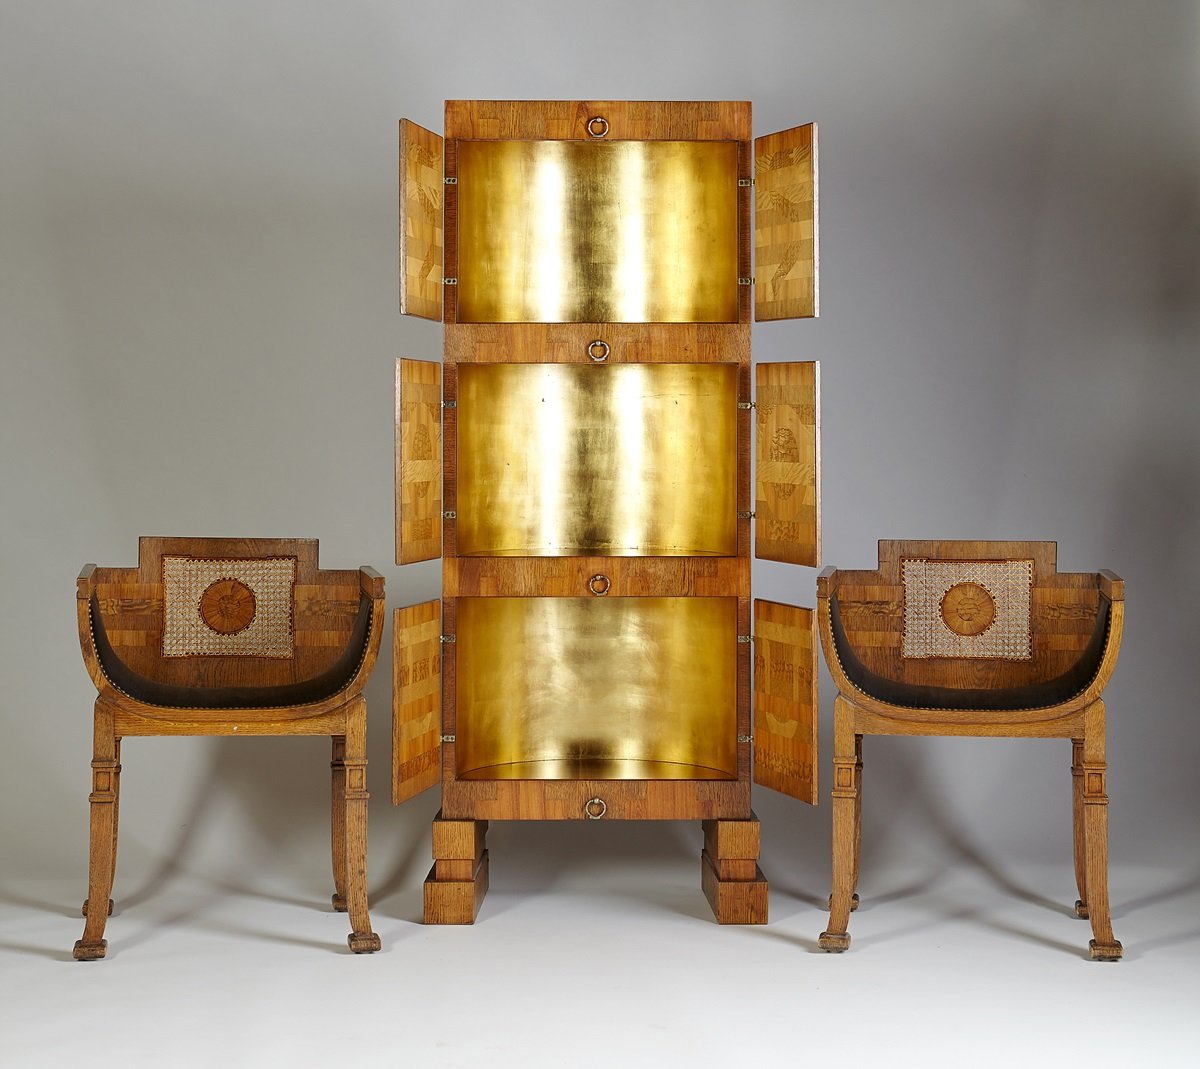 Carl Horvik, cabinet and armchairs (Modernity)